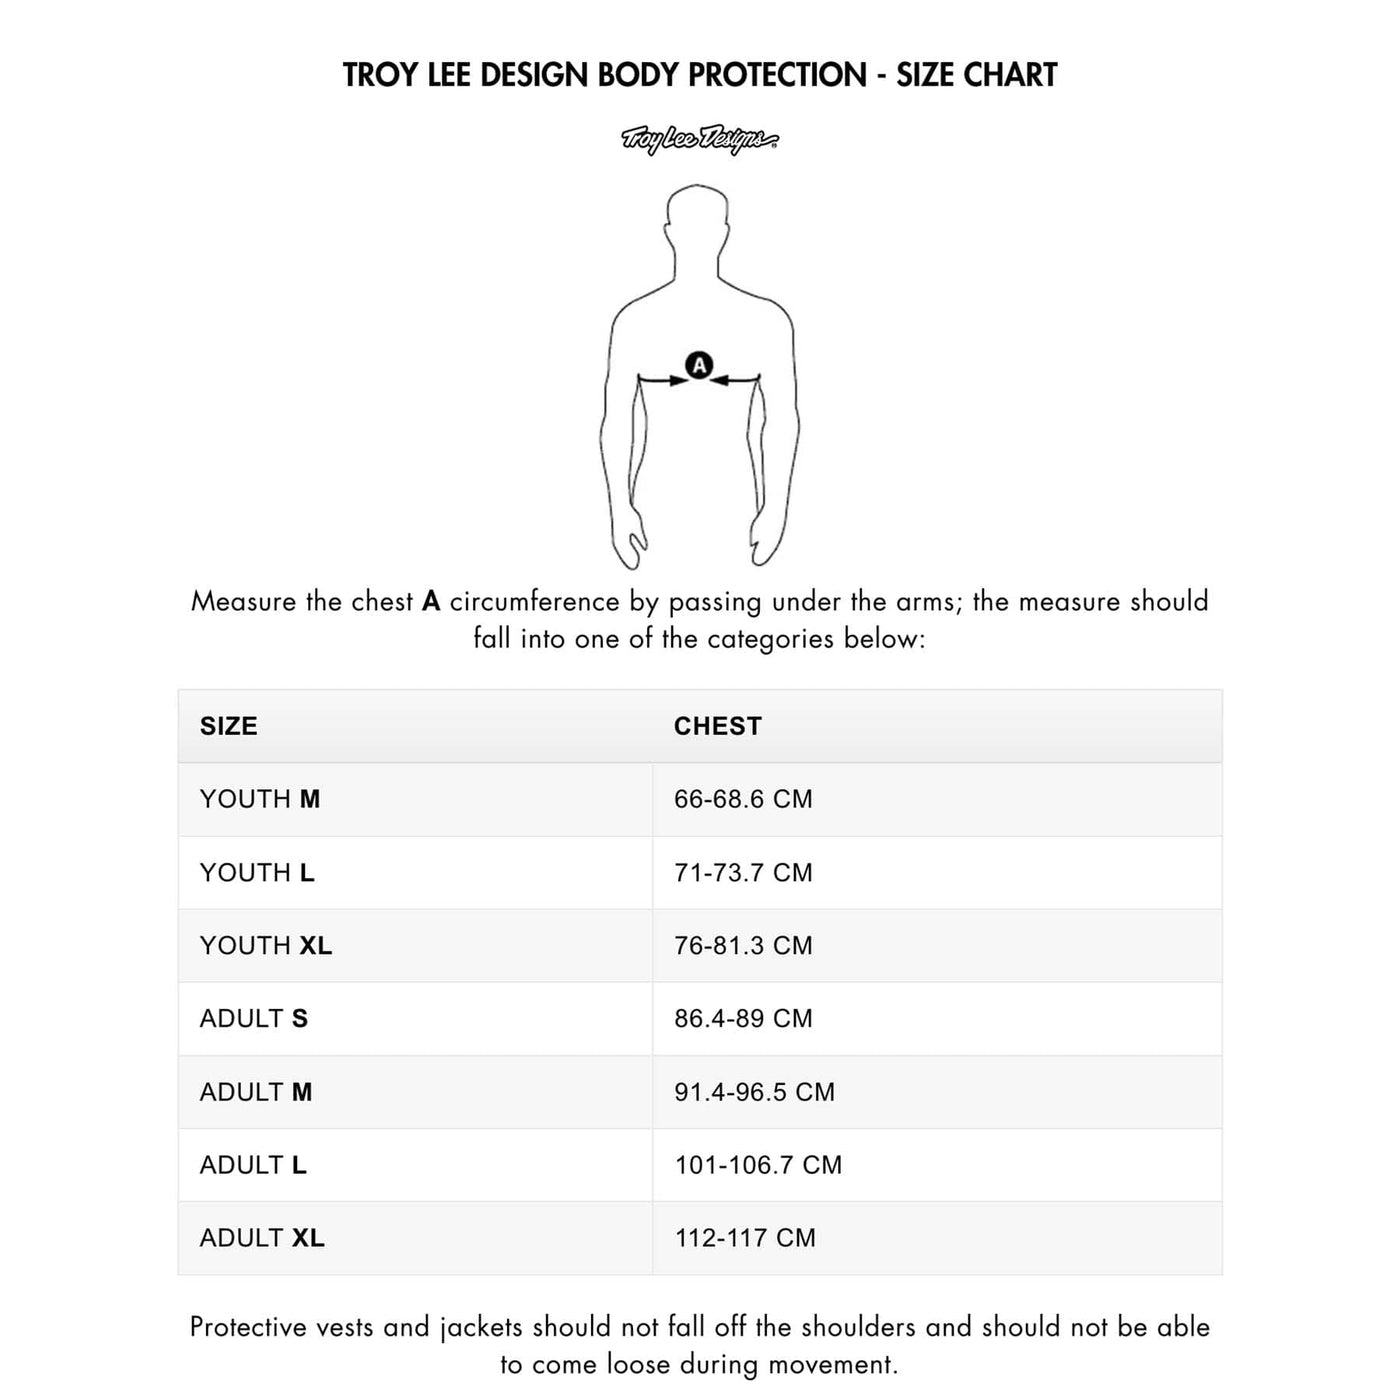 TROY LEE DESIGN BODY PROTECTION - SIZE CHART | 8Lines.eu - Fast delivery, Great Deals!